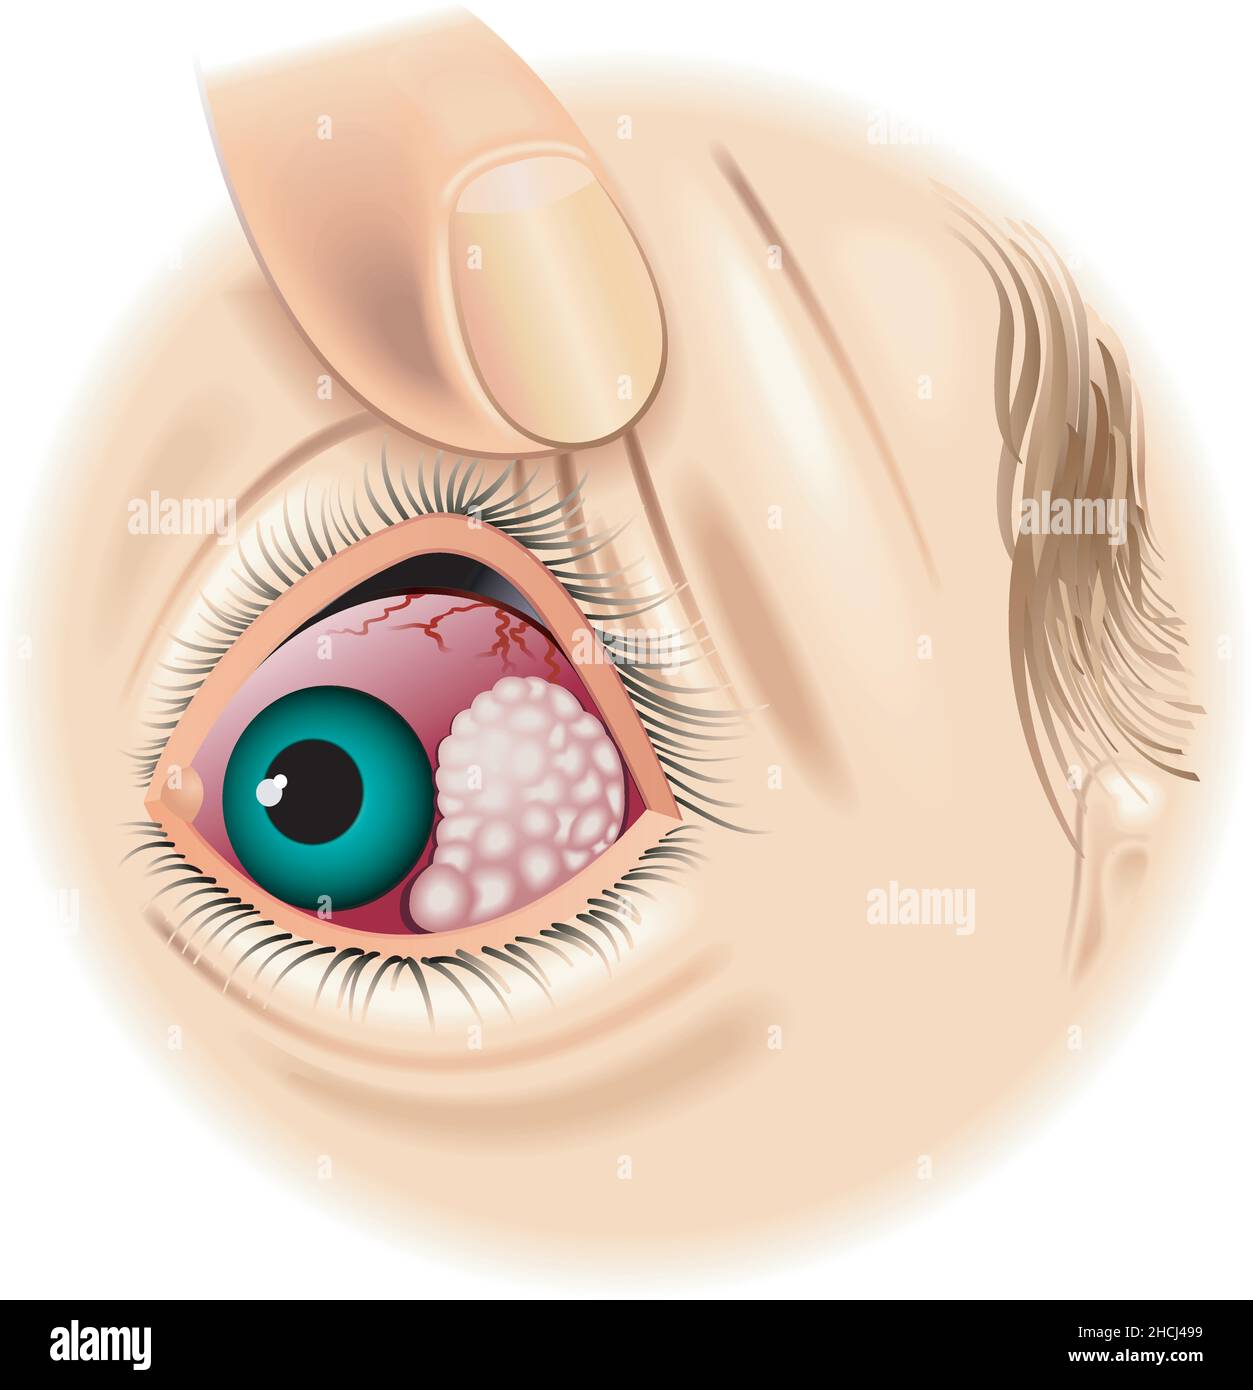 Medical illustration of an eye with tumor. Stock Vector